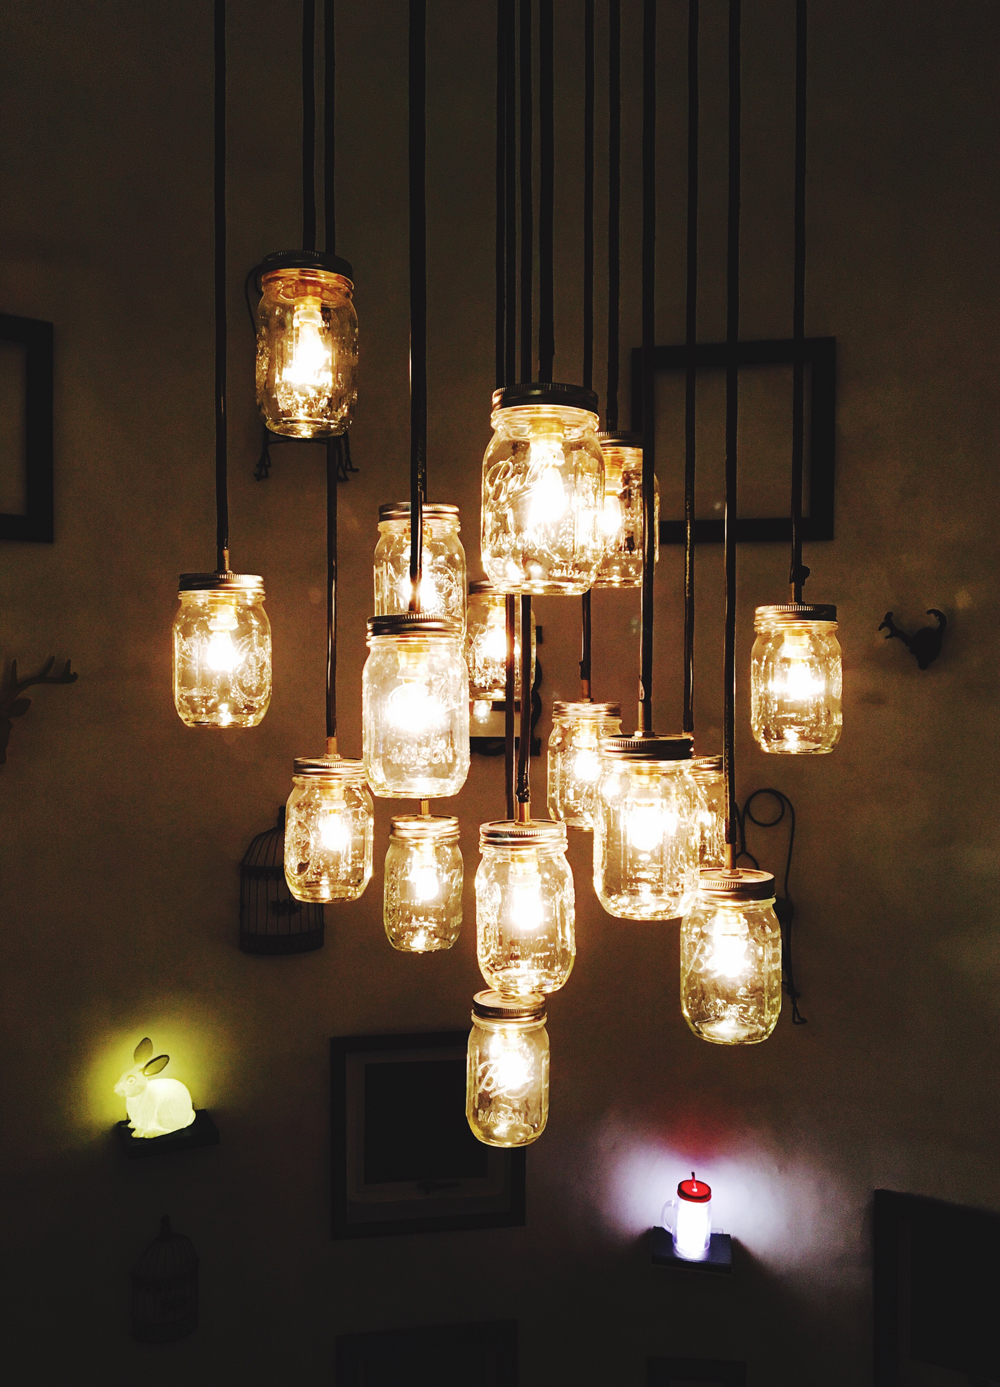 Mason jar lights hanging from a ceiling